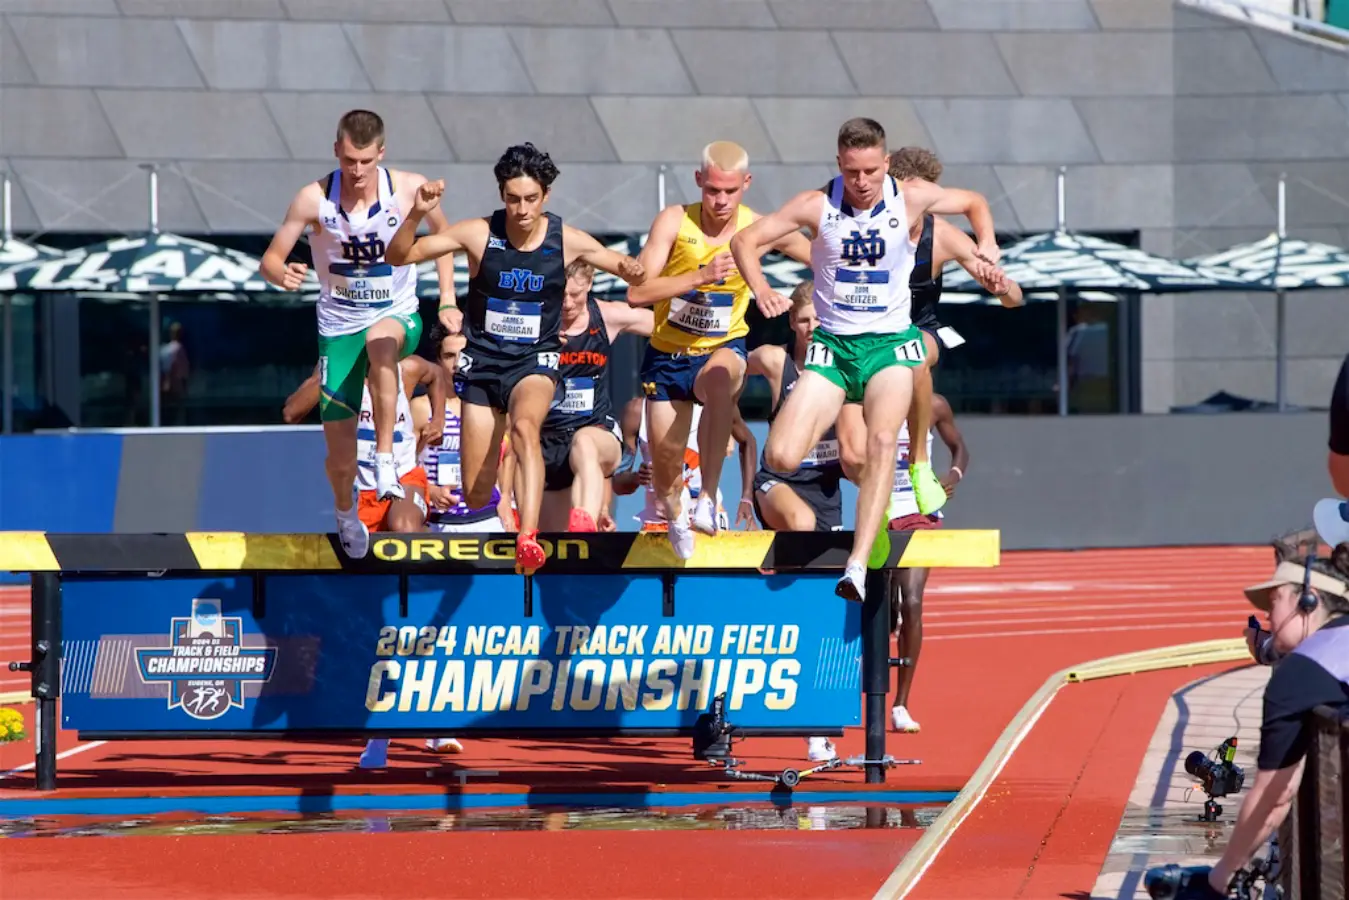 CJ Singleton and Tom Seitzer at the 2024 NCAA Outdoor Championships